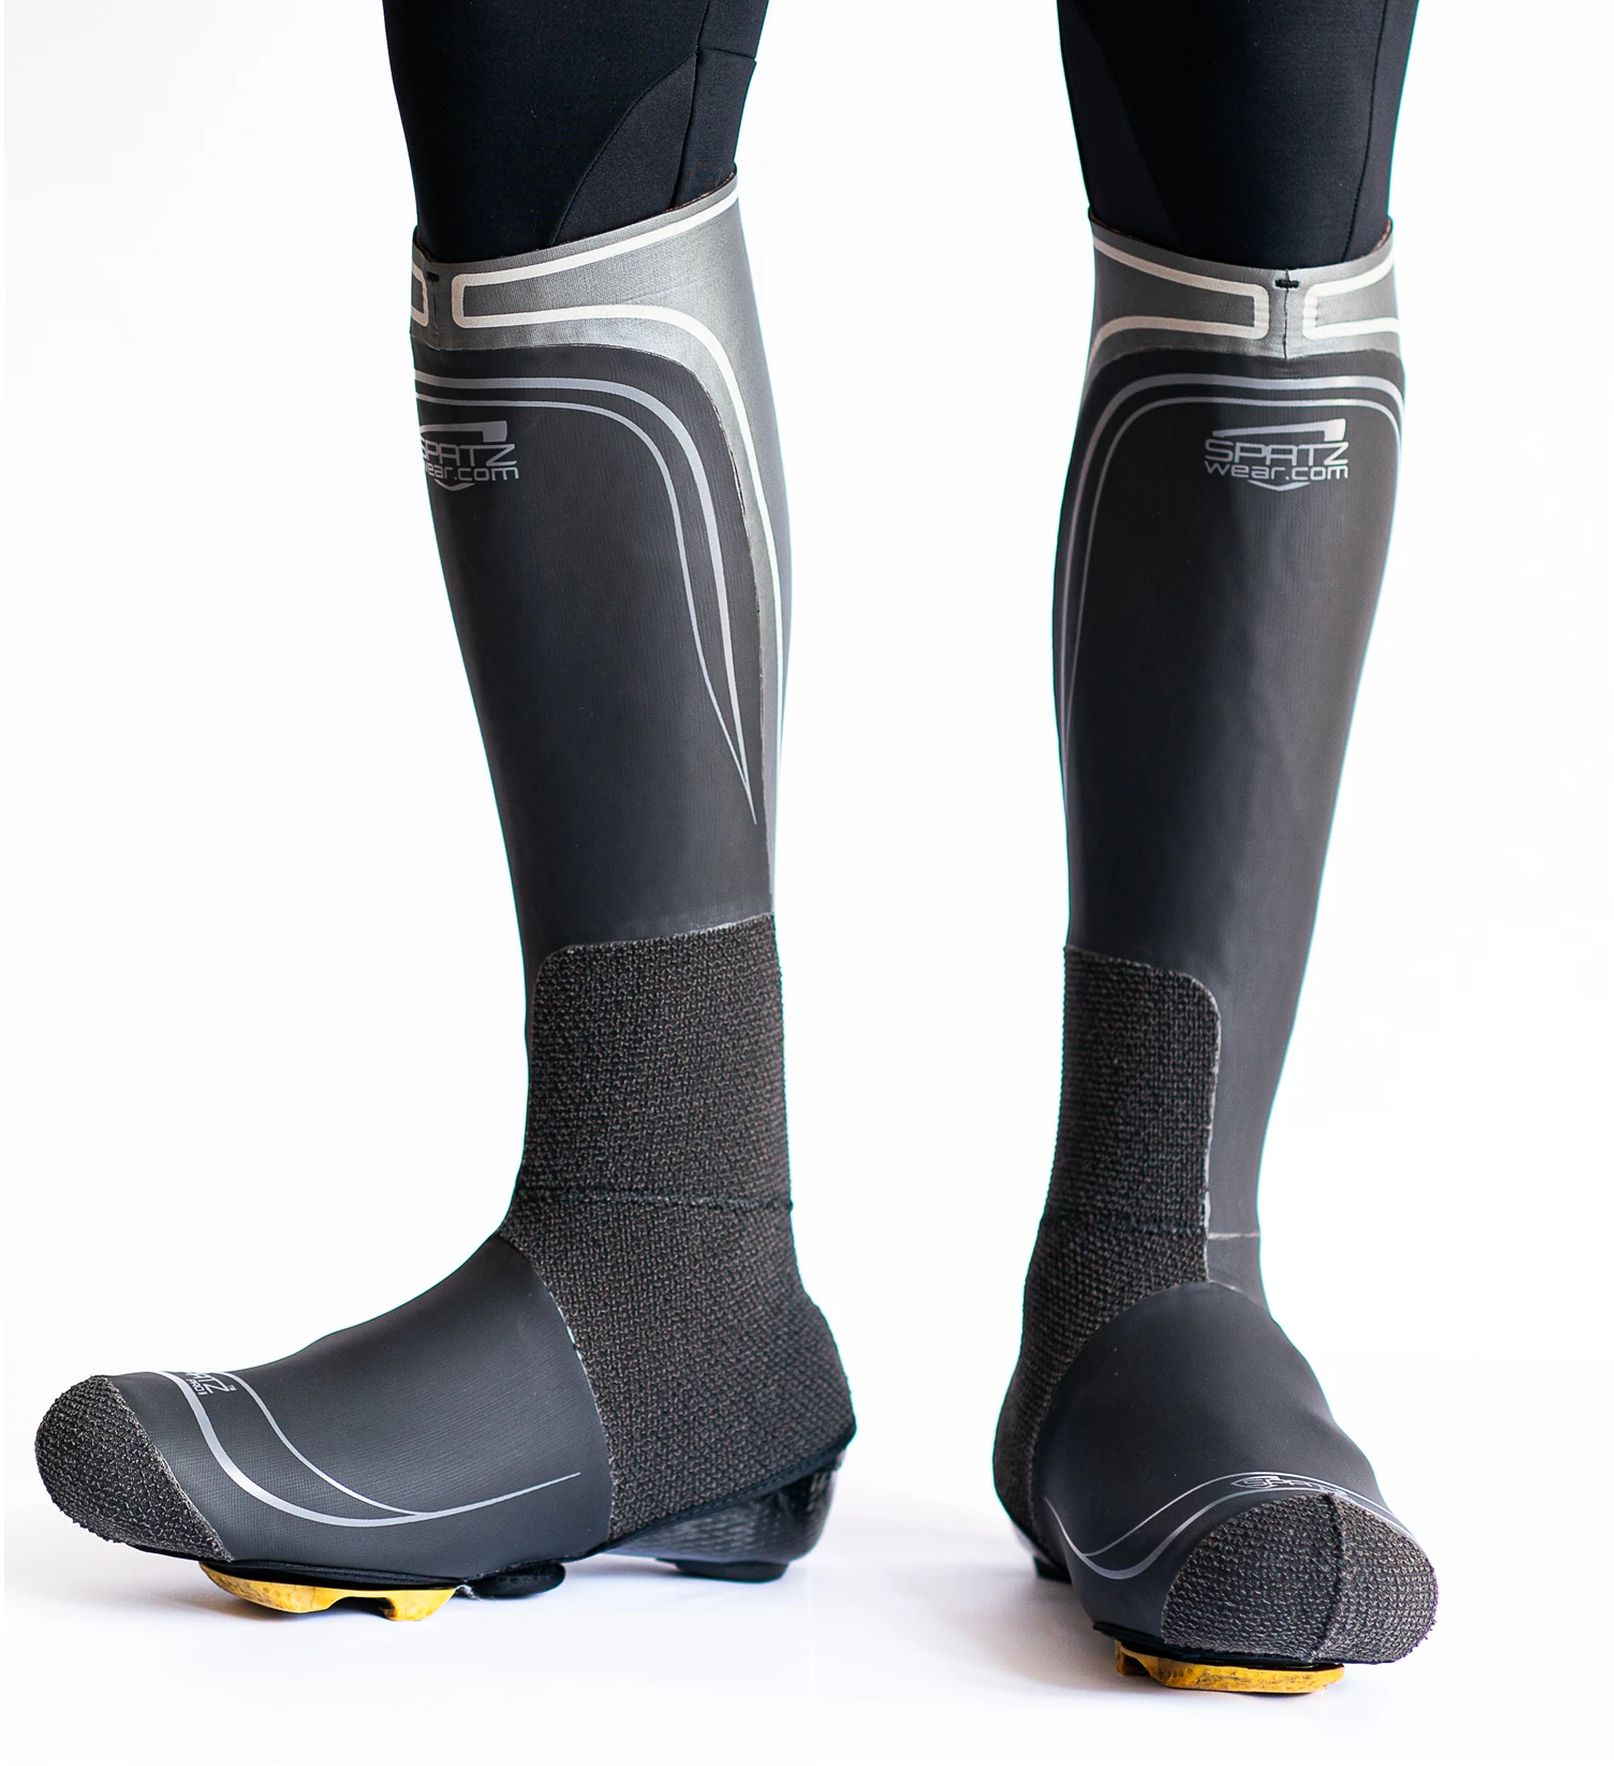 Spatz Pro 2 Overshoes - Overshoes - Cycle SuperStore